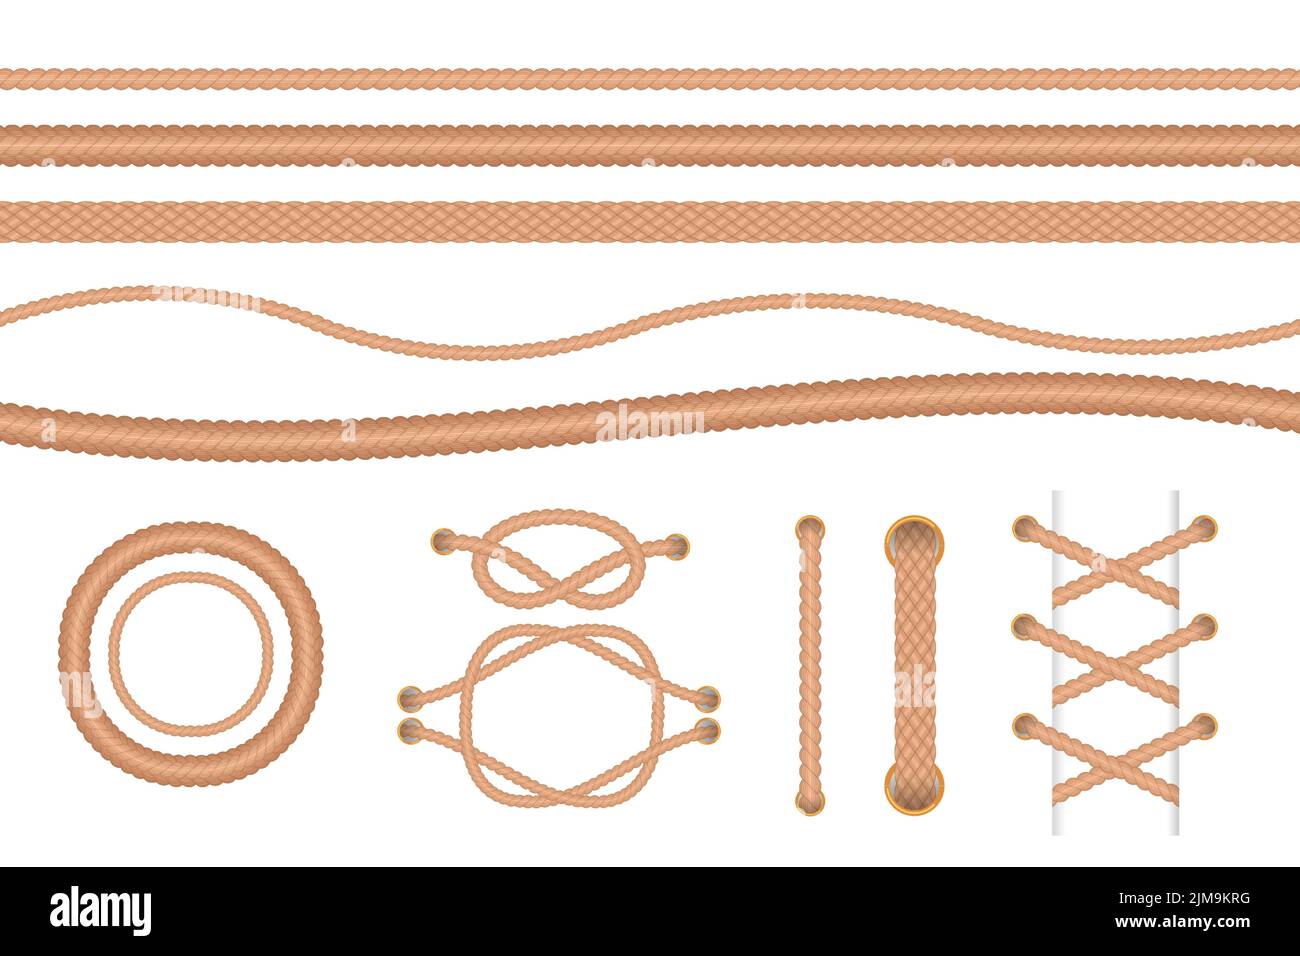 Different types of rope vector illustrations set. Collection of cartoon drawings of marine knots and loops, nautical border isolated on white backgrou Stock Vector